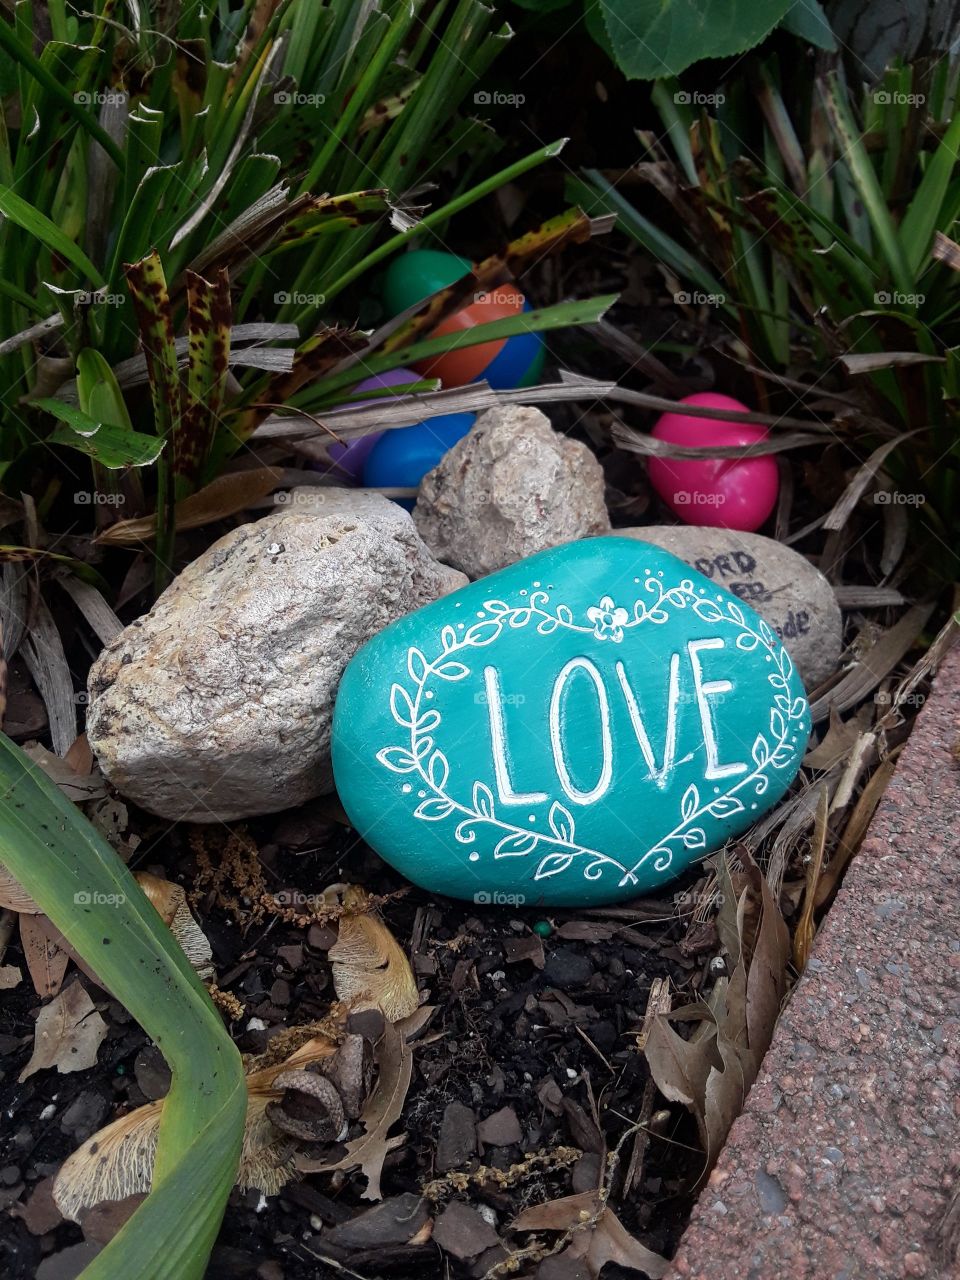 Rocky garden scene with colorful Easter eggs partly hidden.